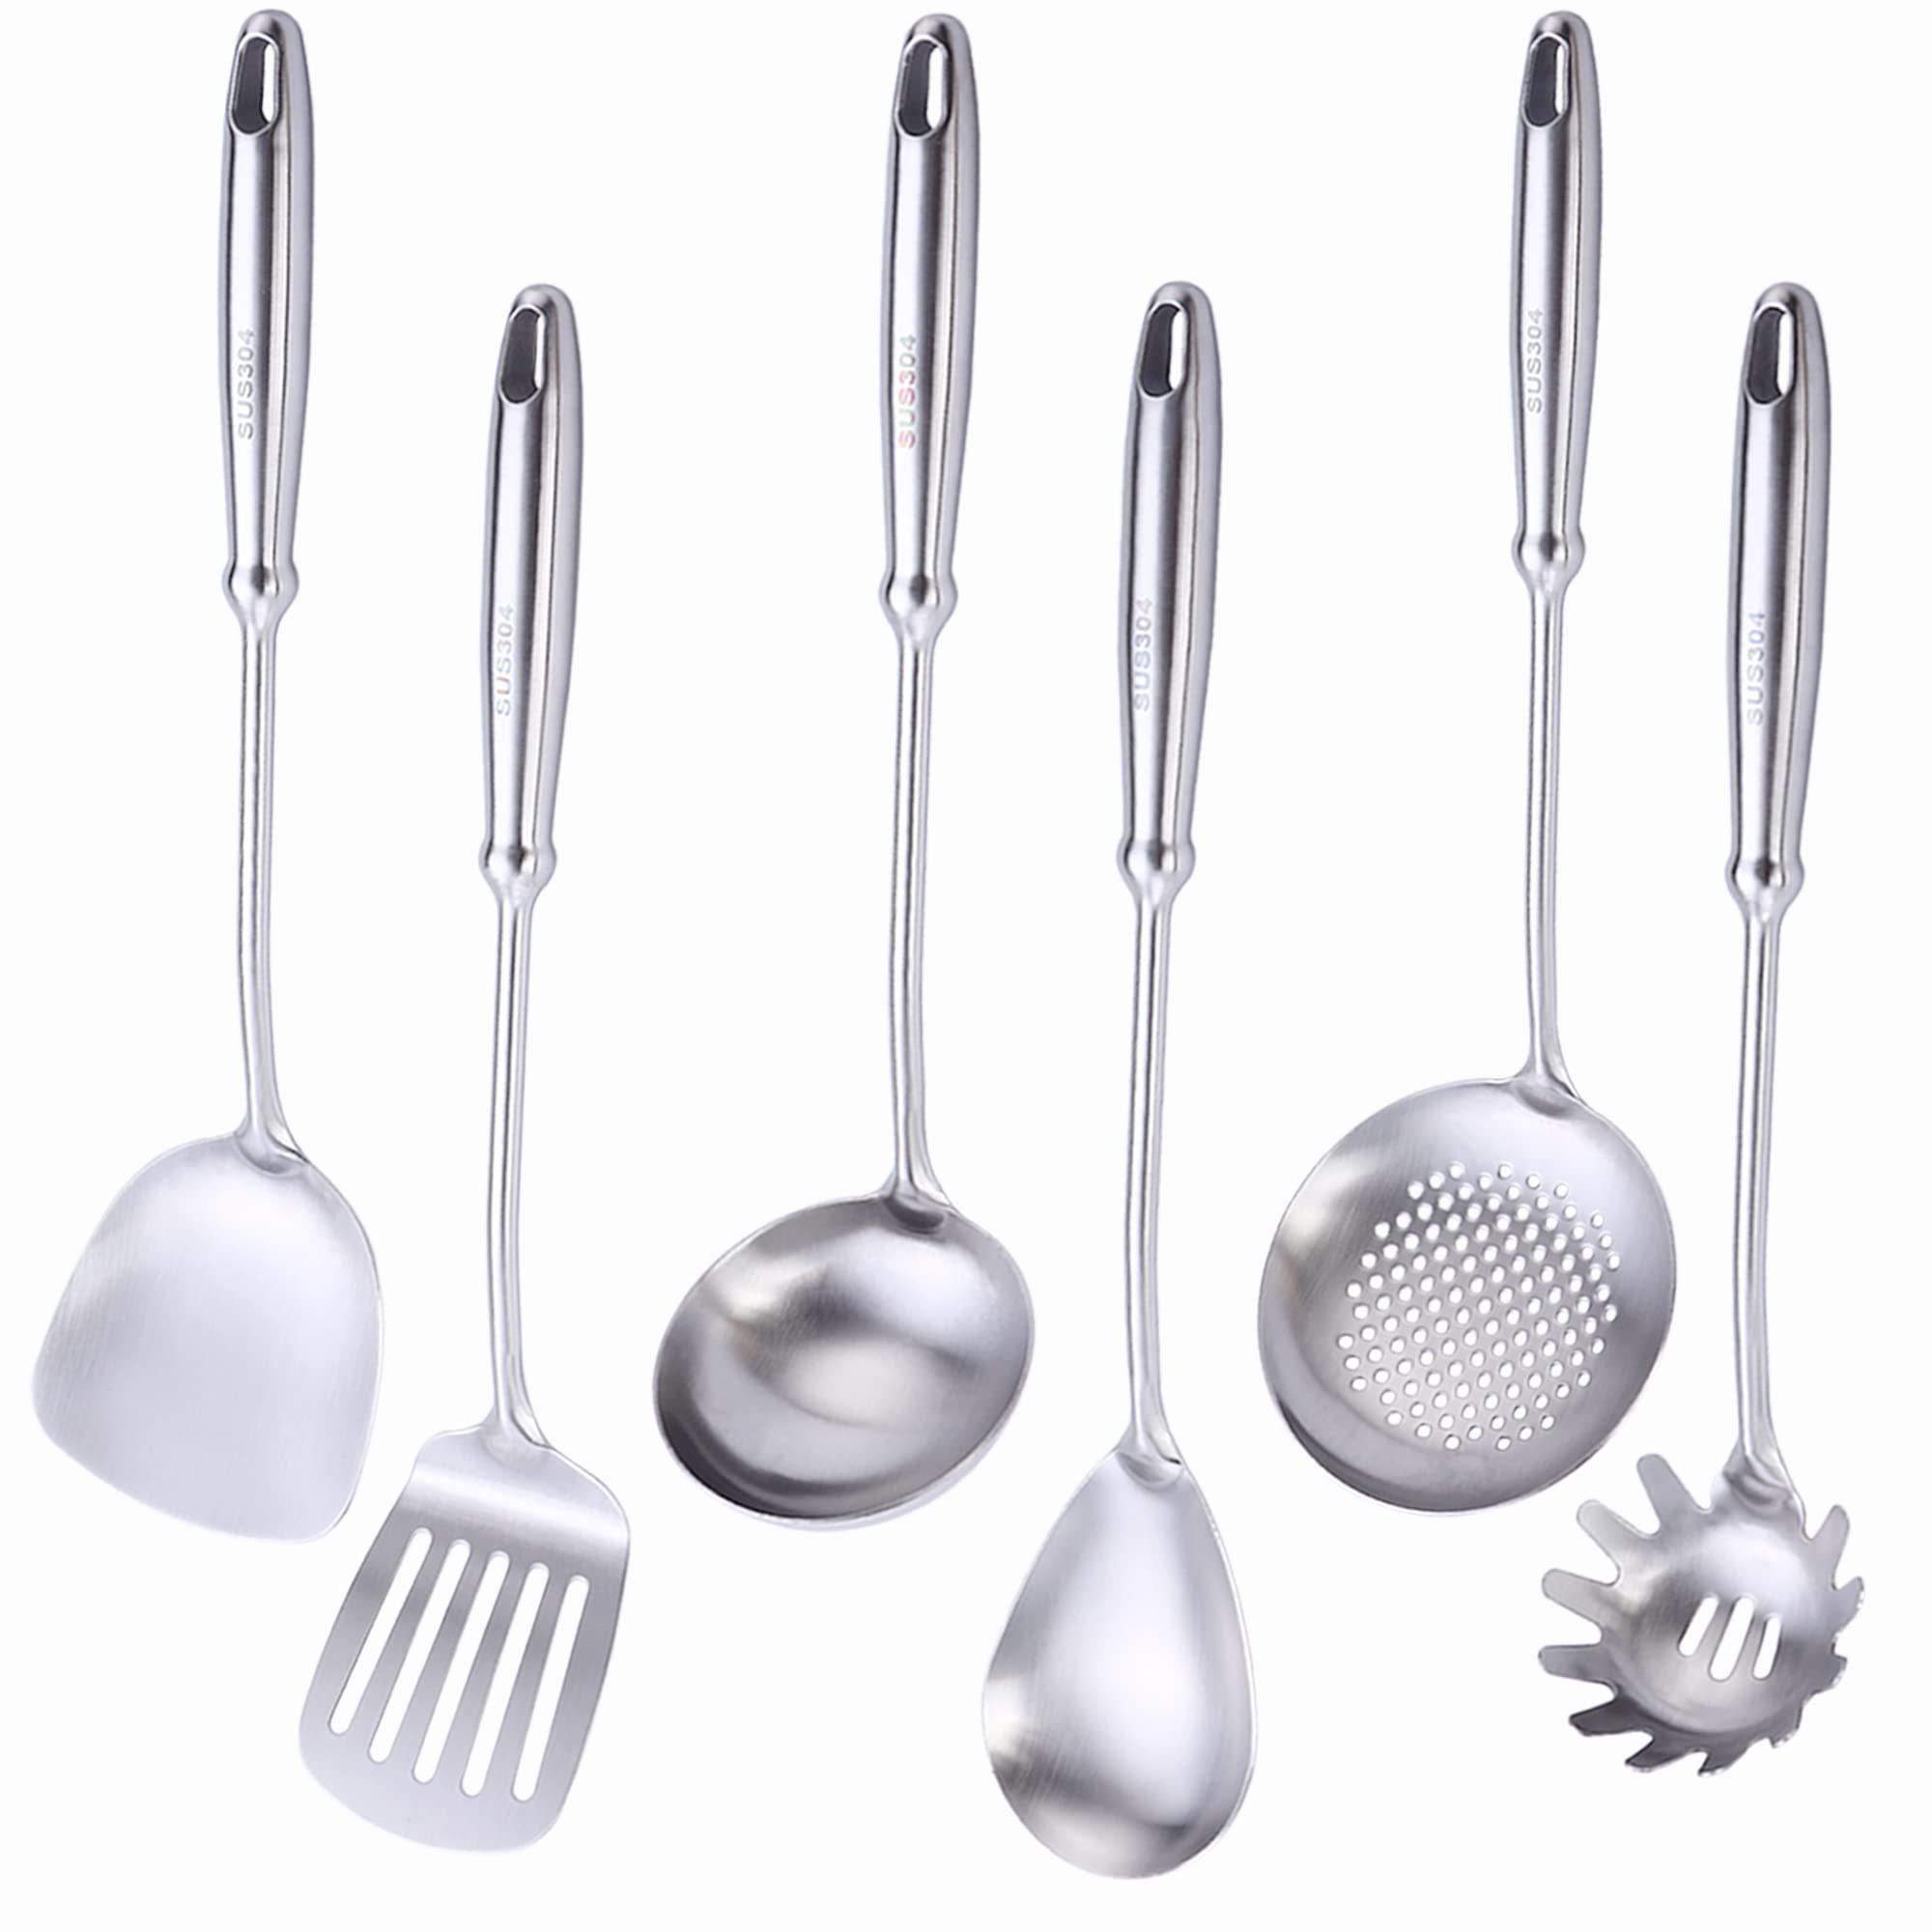 Marte 304 Stainless Steel Kitchen Cooking Utensils Set,6 Pcs All Metal Professional Cooking Tools Set,Matte Heavy Duty Cooking Uten